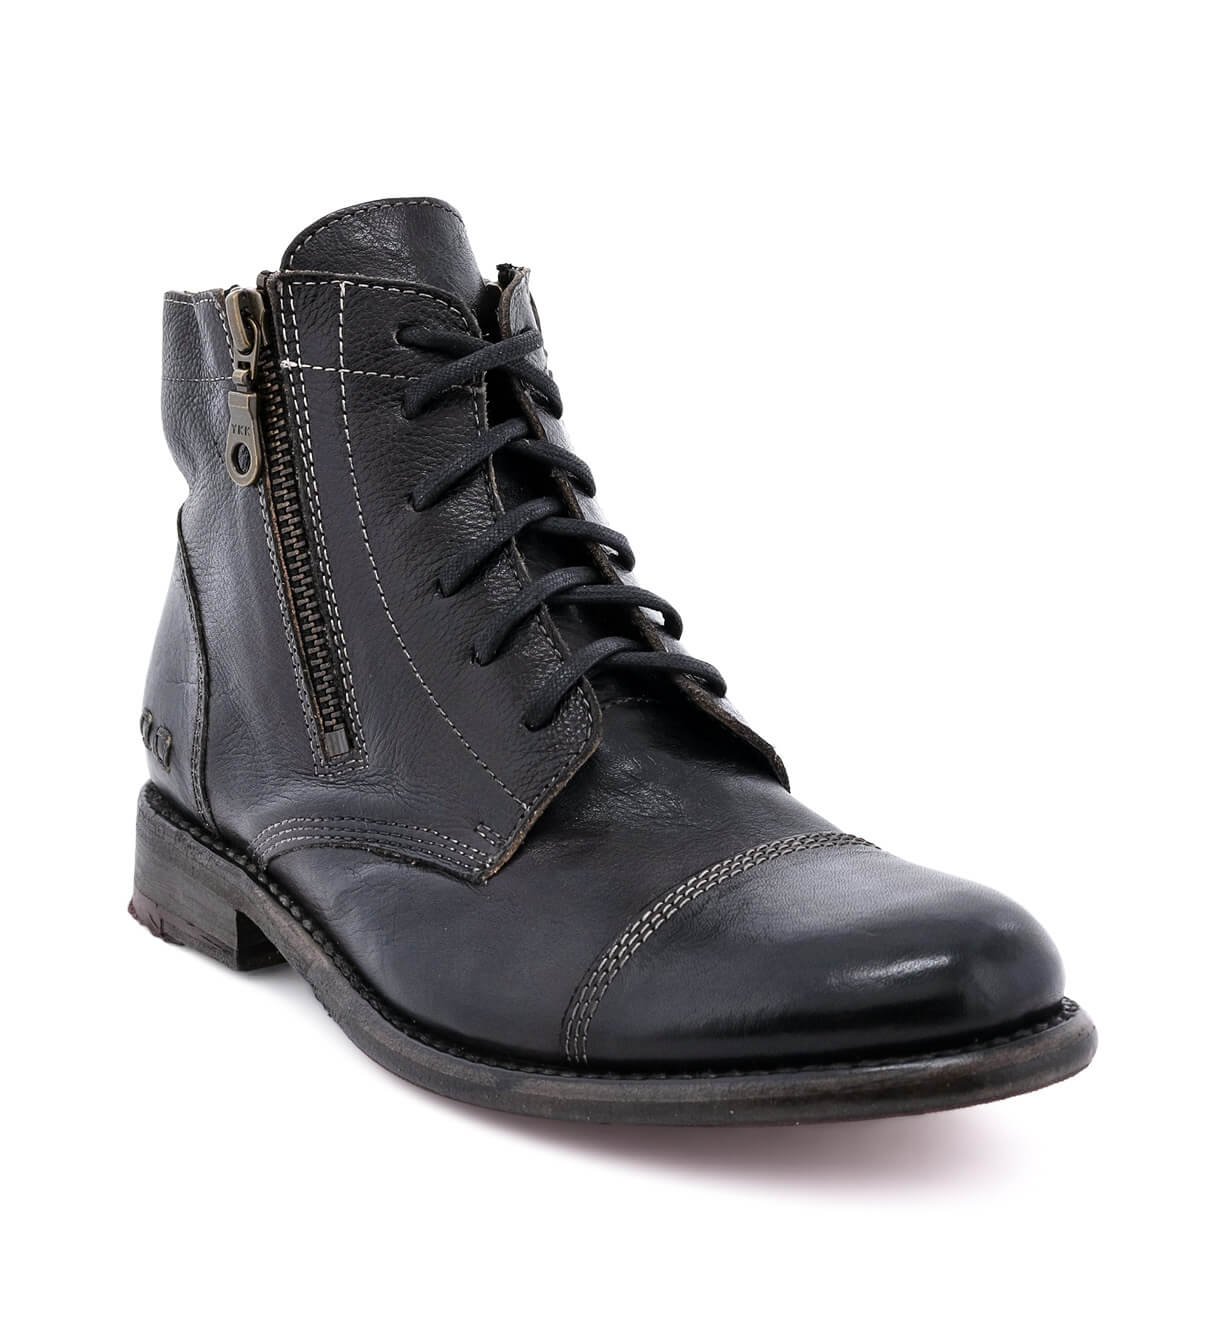 An enduring black leather boot with a zipper on the side, the Bonnie Boot by Bed Stu.